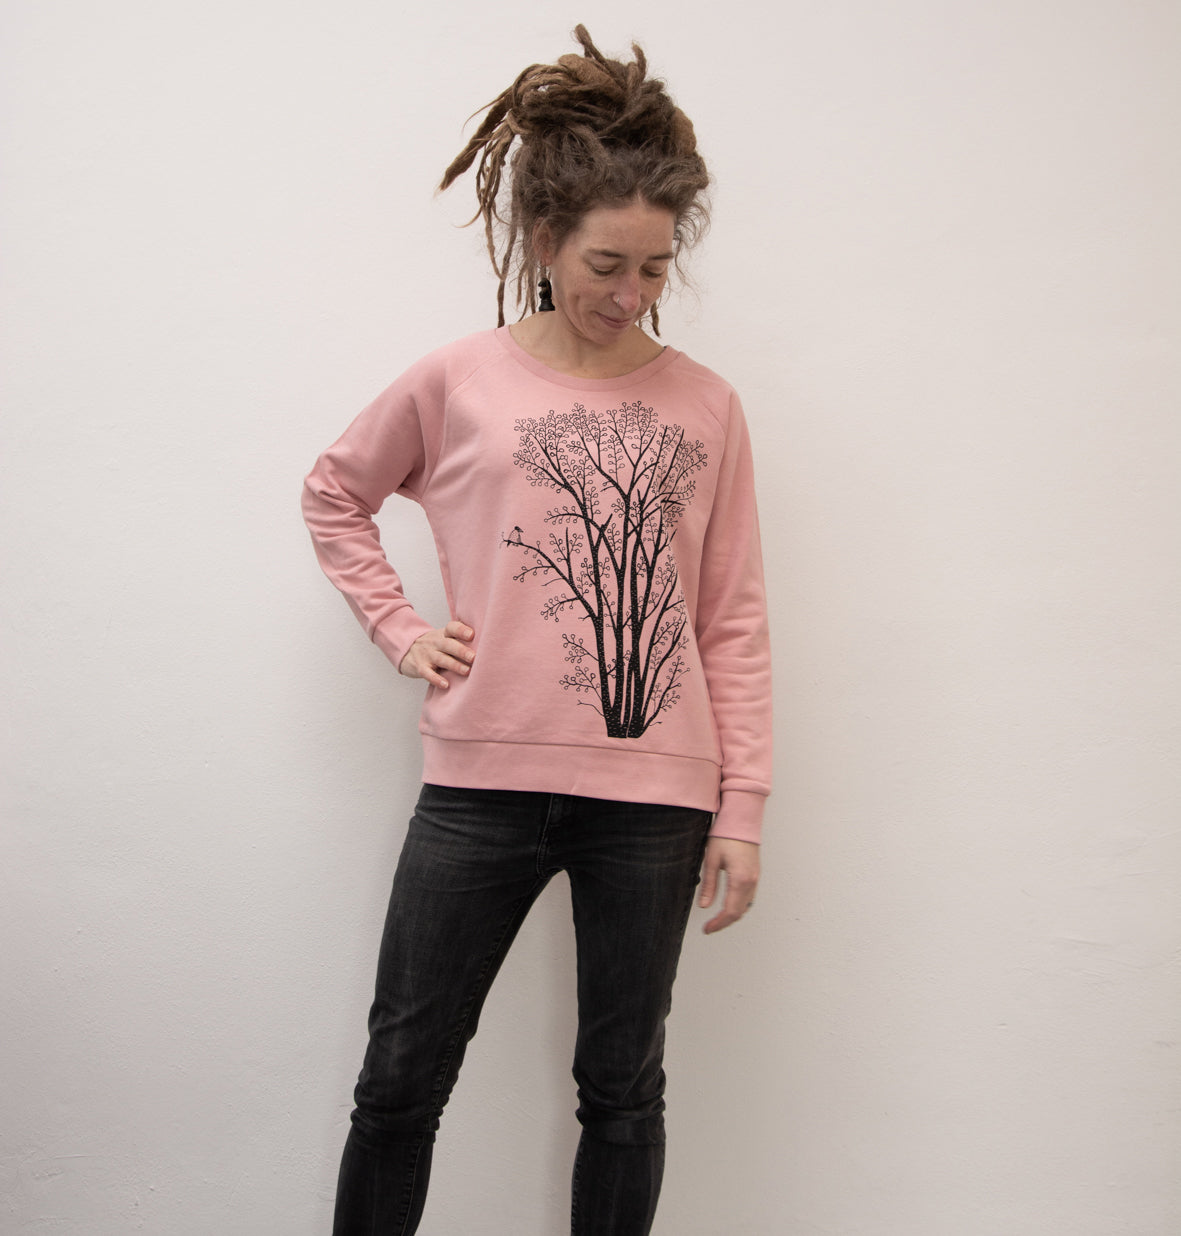 kleinserie Erle mit Elster Pulli in canyon pink S-XL